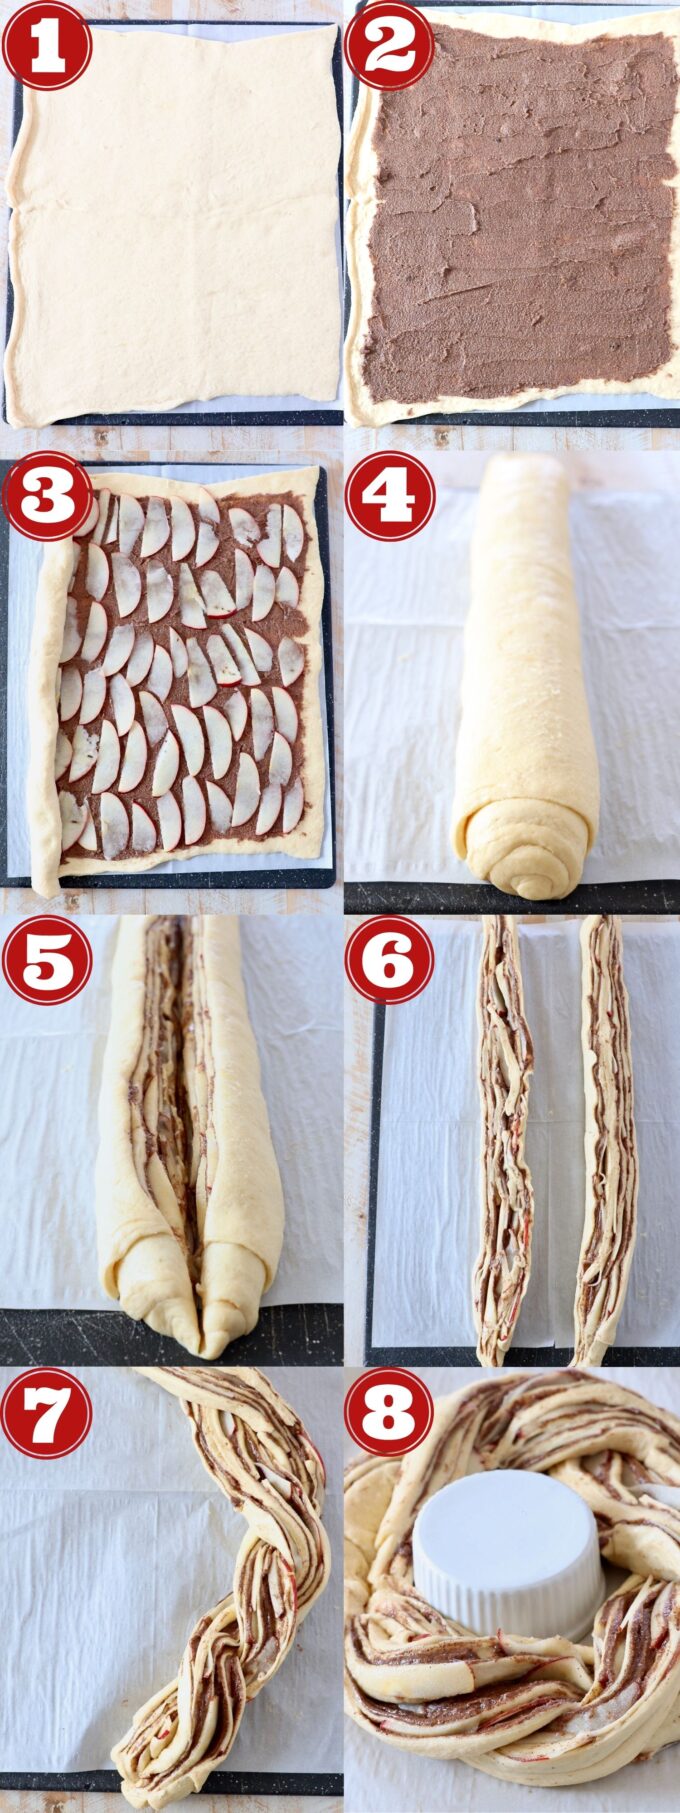 collage of images showing how to make a cinnamon roll wreath